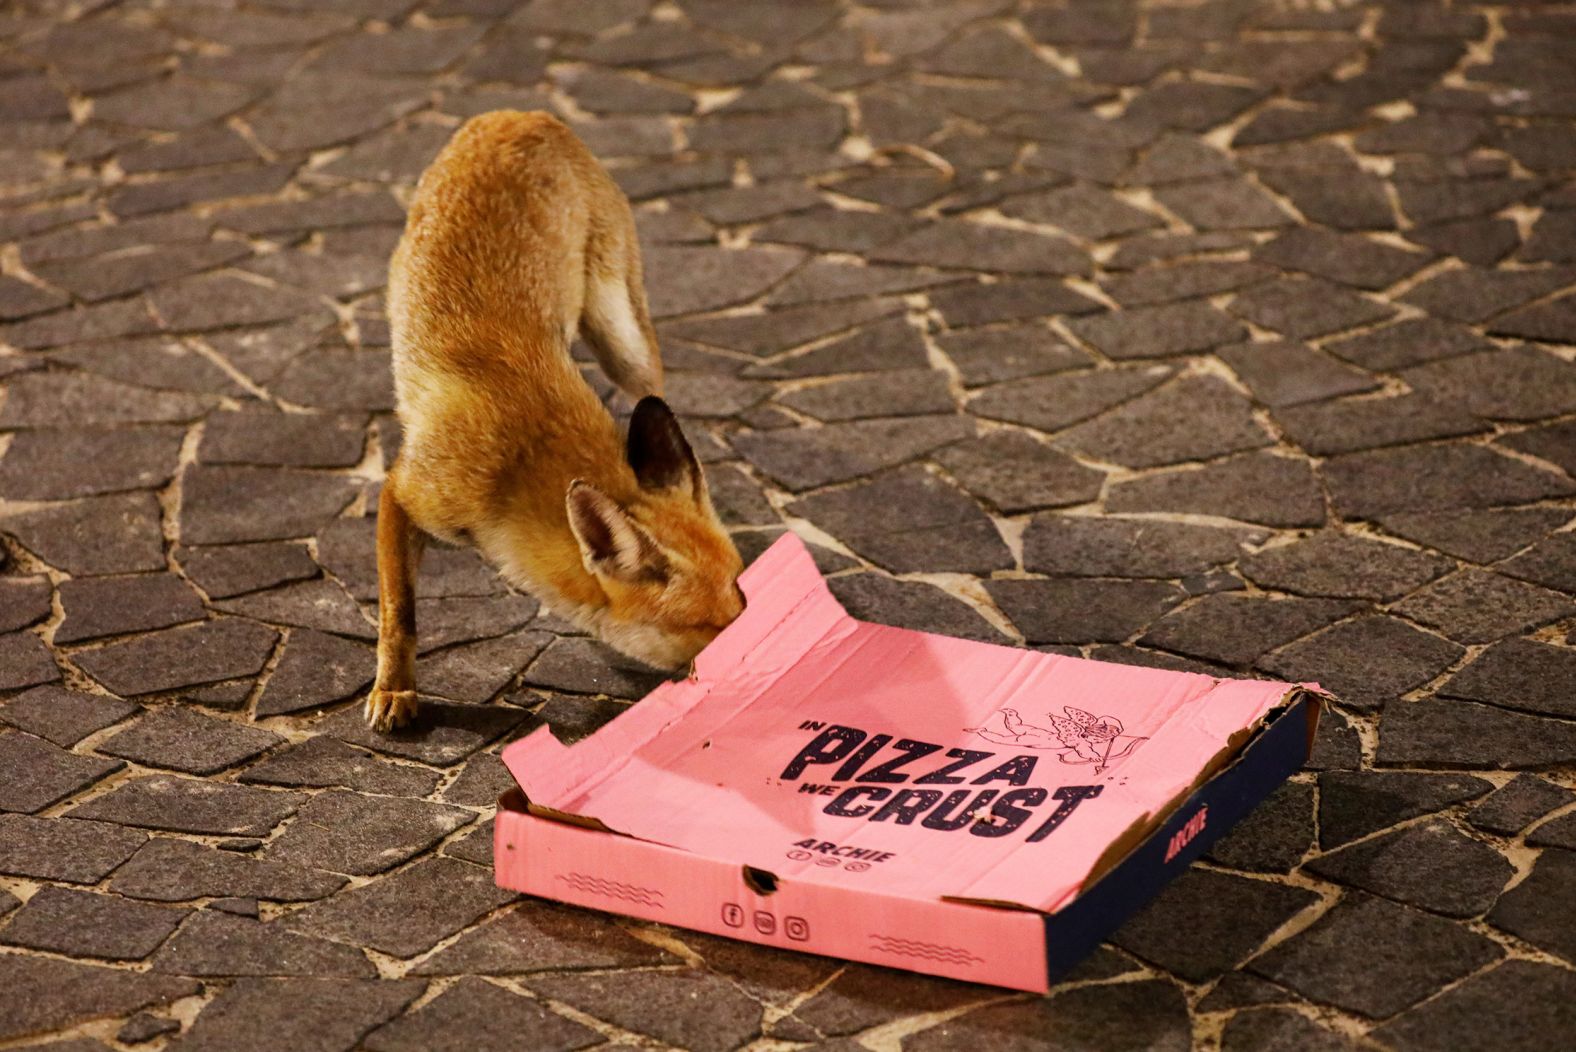 A red fox checks out a pizza box on a promenade in Ashkelon, Israel, on April 17. A family of foxes has become a regular feature in the city, <a href="https://www.reuters.com/article/us-health-coronavirus-israel-foxes/emboldened-by-closures-foxes-prowl-an-ancient-port-city-in-israel-idUSKCN2241RL" target="_blank" target="_blank">Reuters reported,</a> coming out of the desert to explore empty streets.